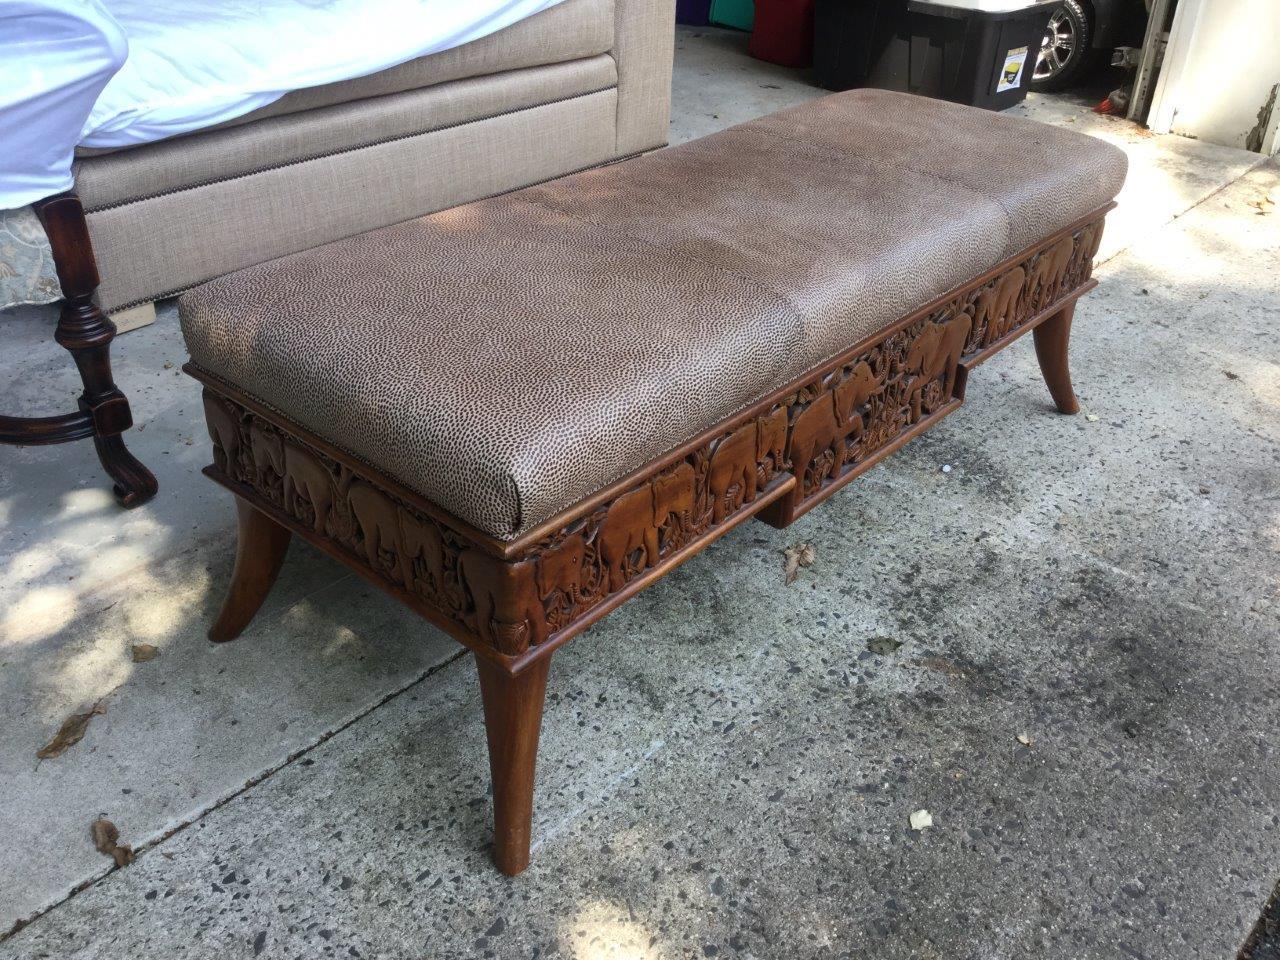 Indonesian Distinguished Vintage Carved Wooden Bench with Animal Print Leather Upholstery